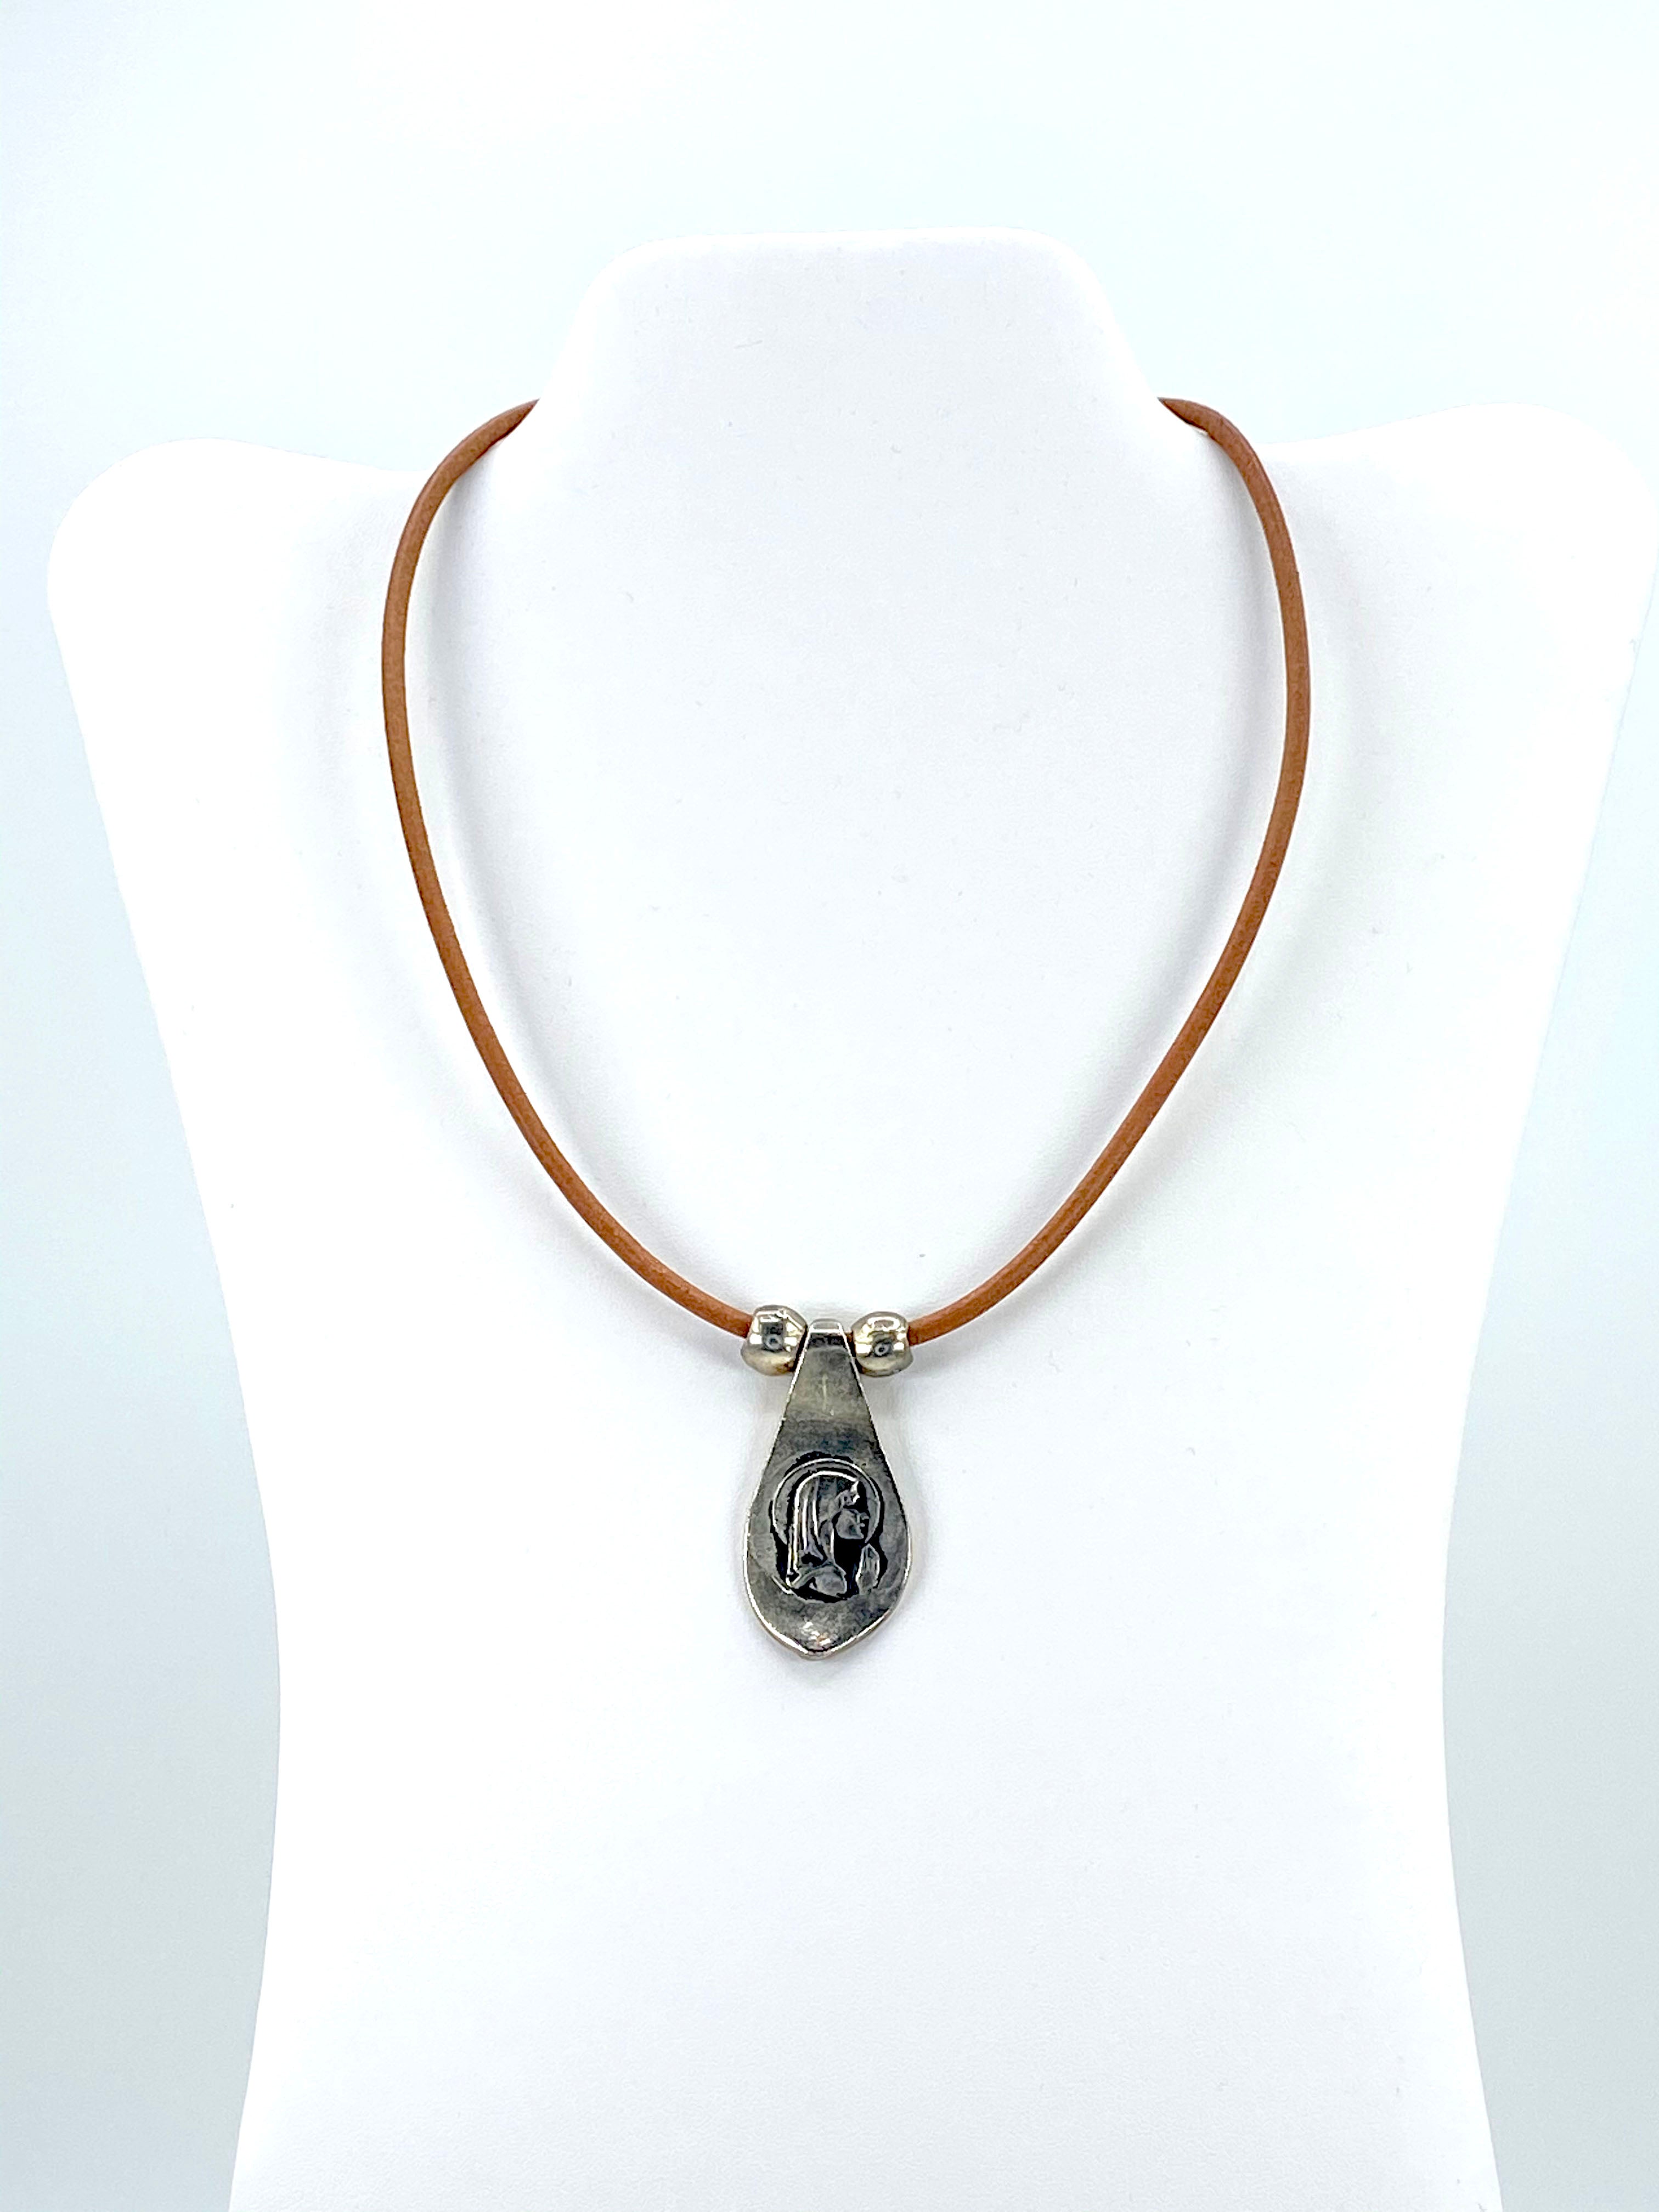 Vintage Virgin Mary Necklace  Handmade Jewelry with Genuine Leather Straps by Graciela's Collection